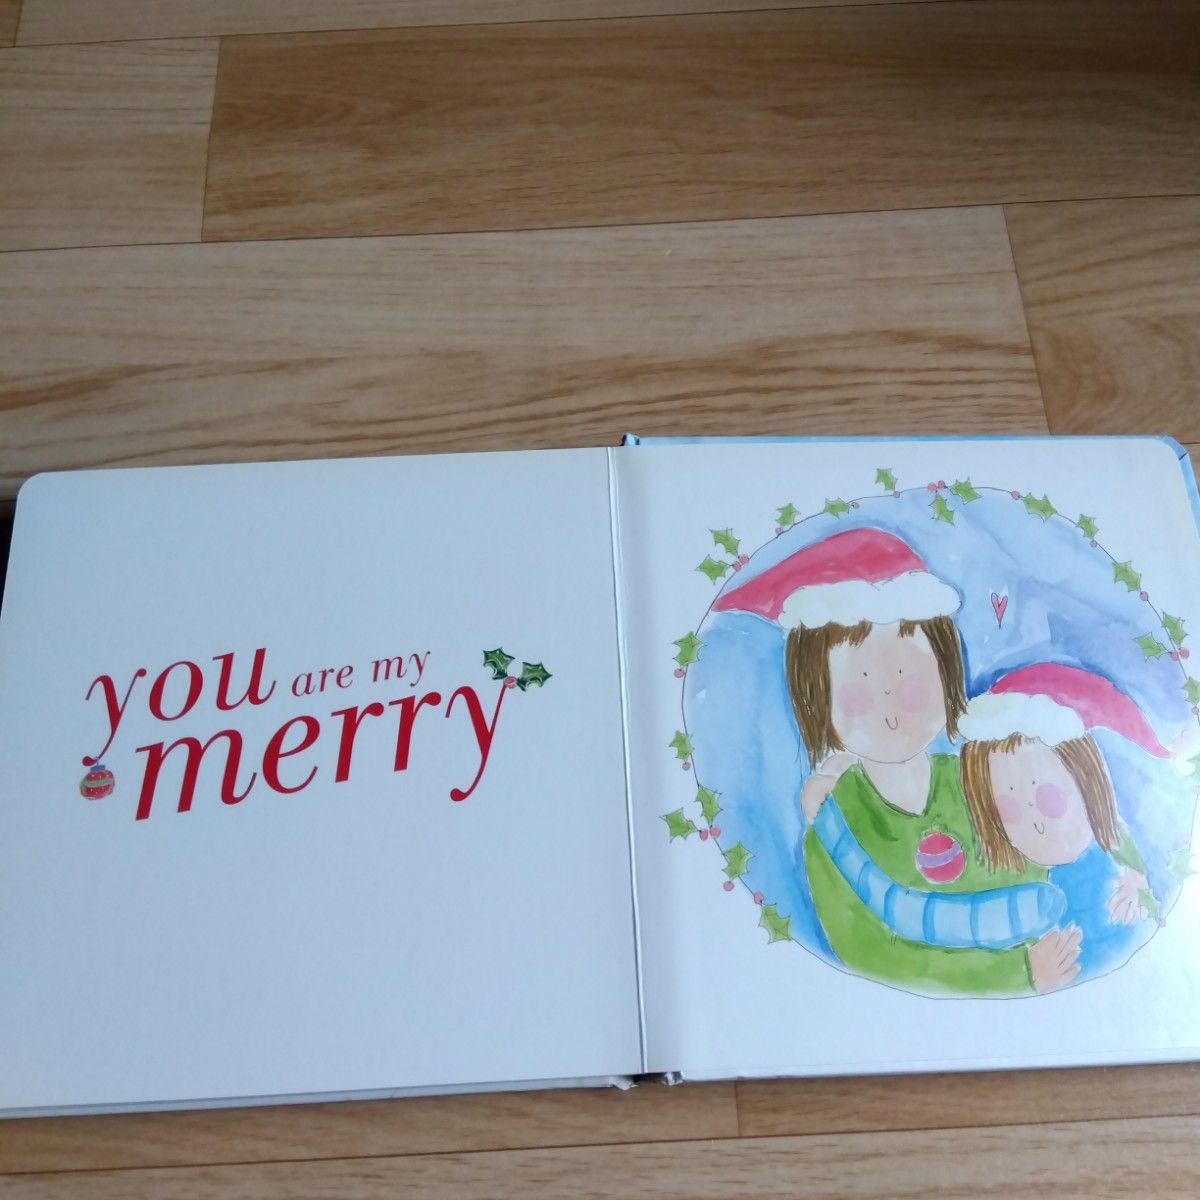 You are my merry Christmas 英語絵本 洋書